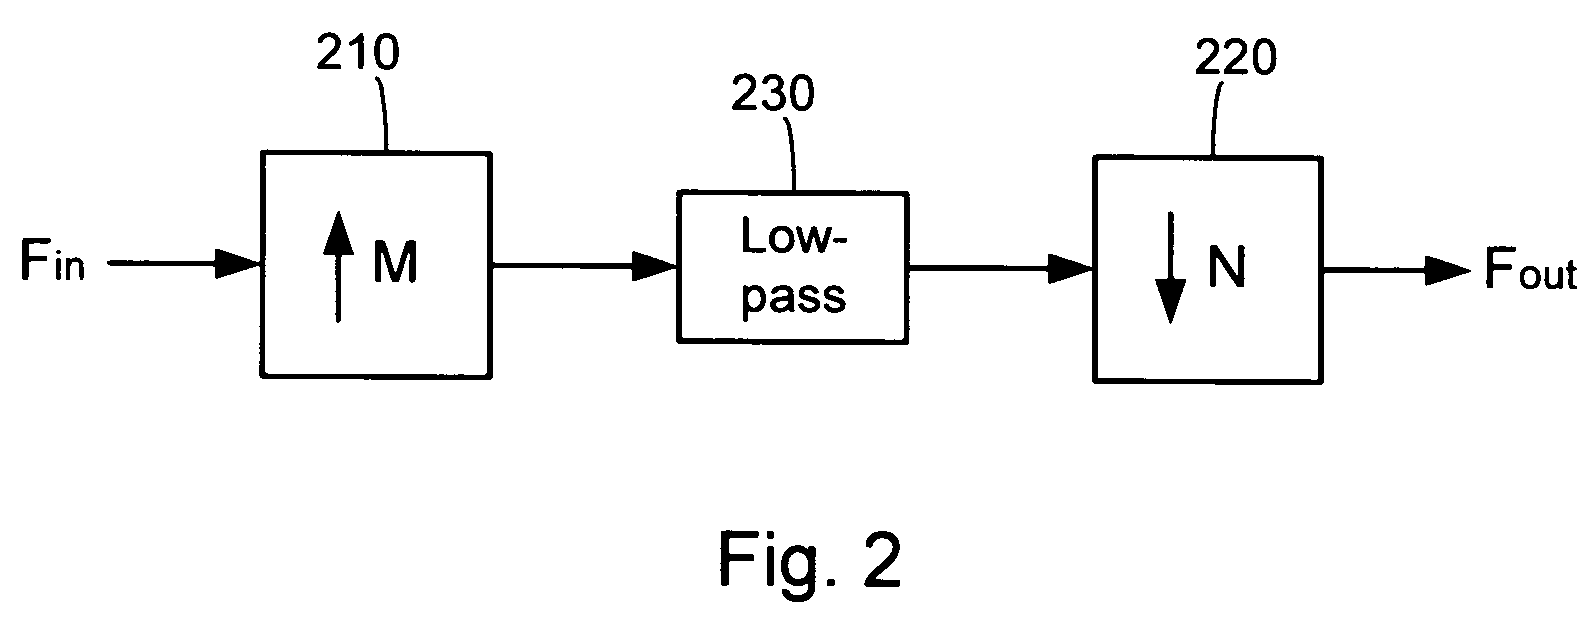 Systems and methods for implementing a sample rate converter using hardware and software to maximize speed and flexibility